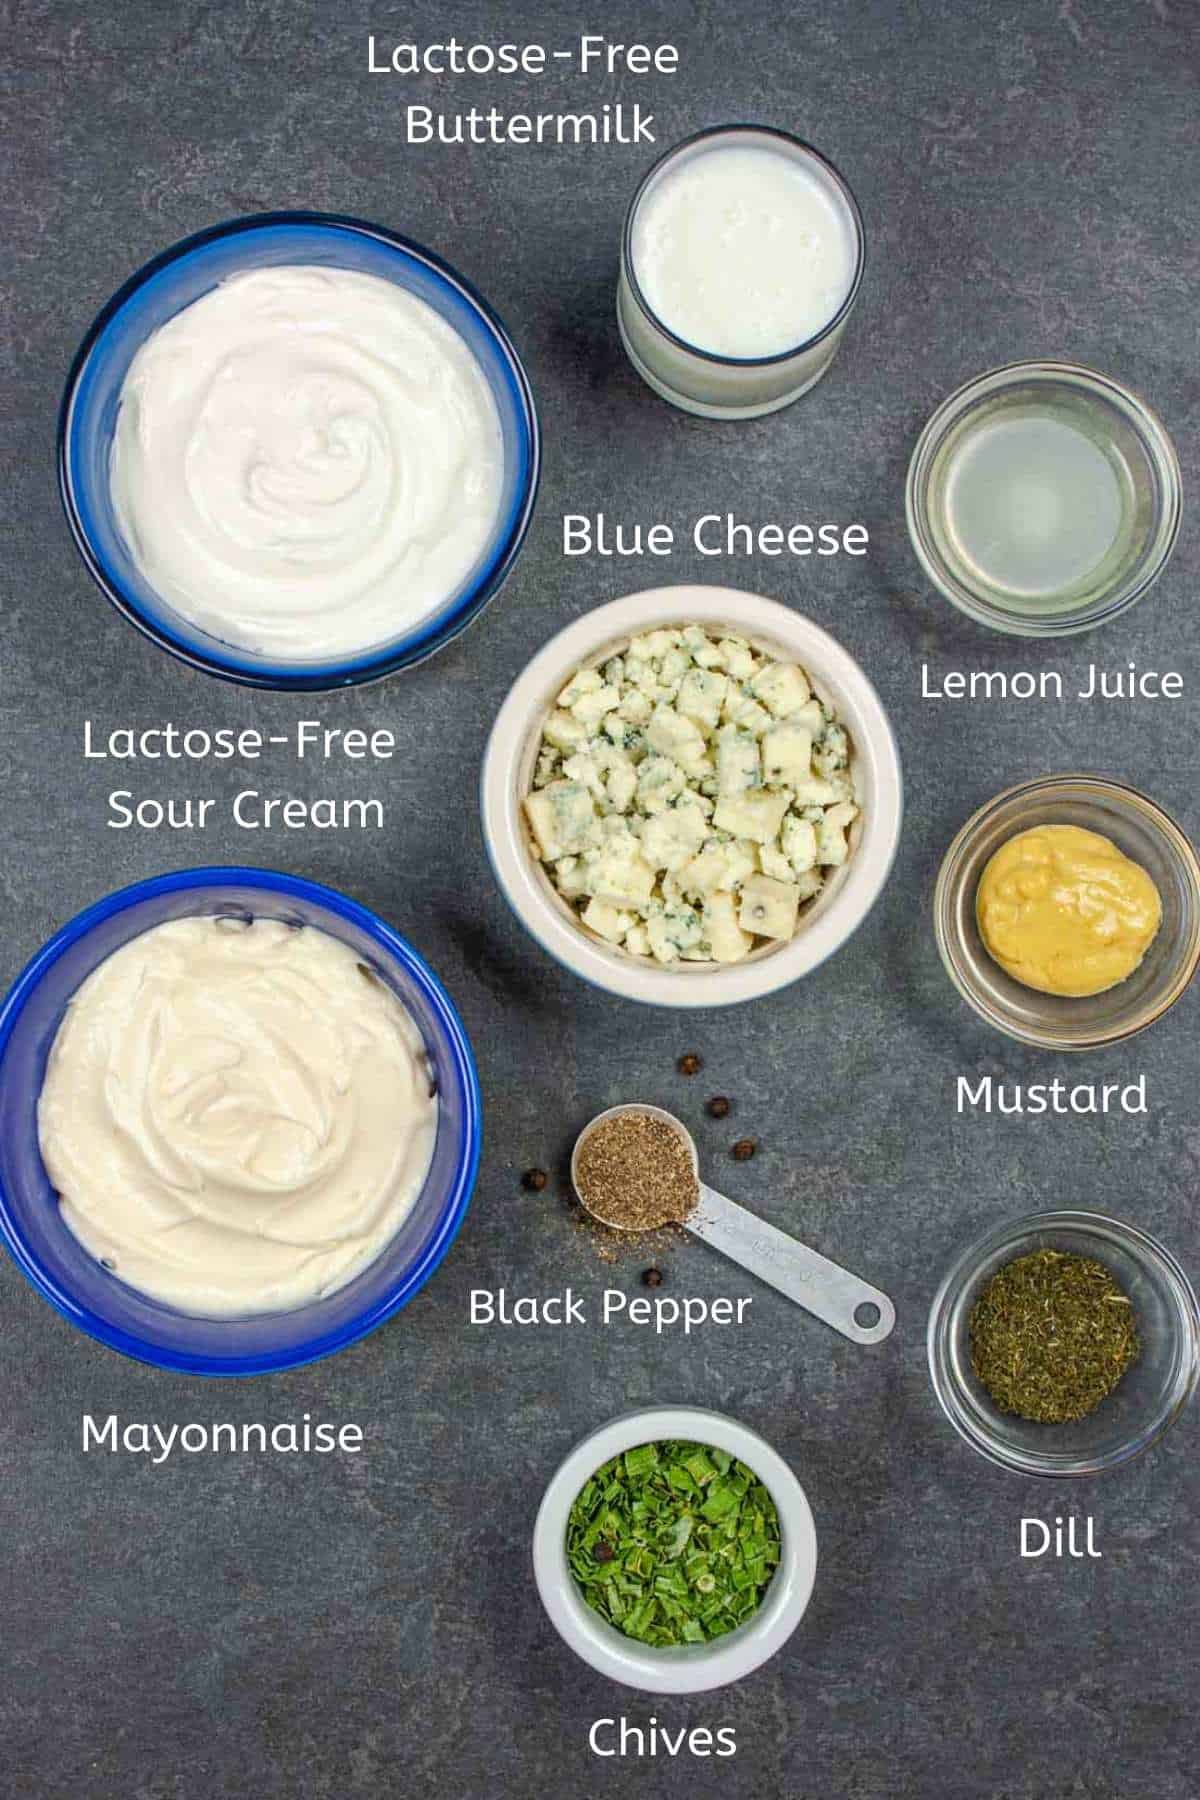 Dressing ingredients in small bowls with text labels under each on a gray background.